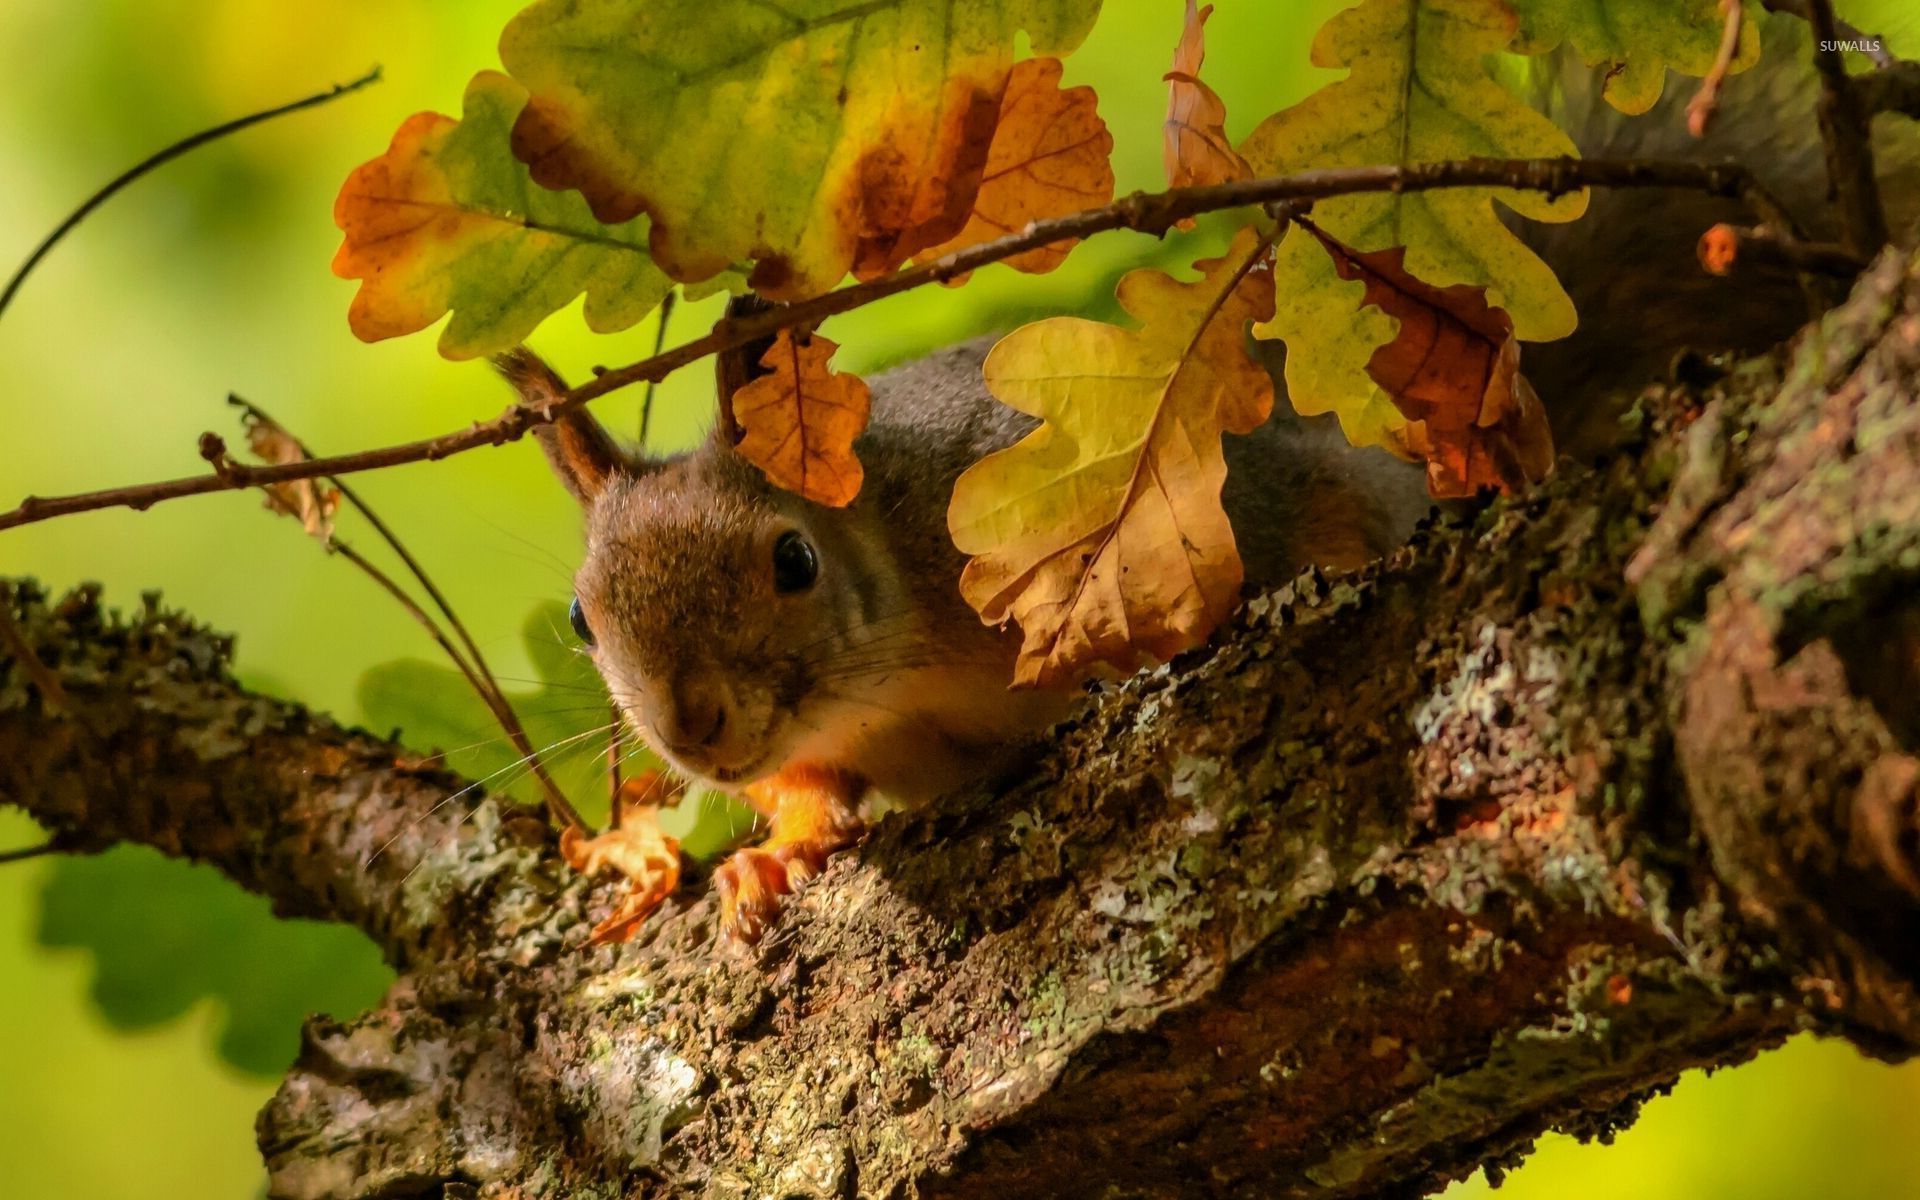 Squirrel on the oak tree wallpaper - Animal wallpapers - #27553